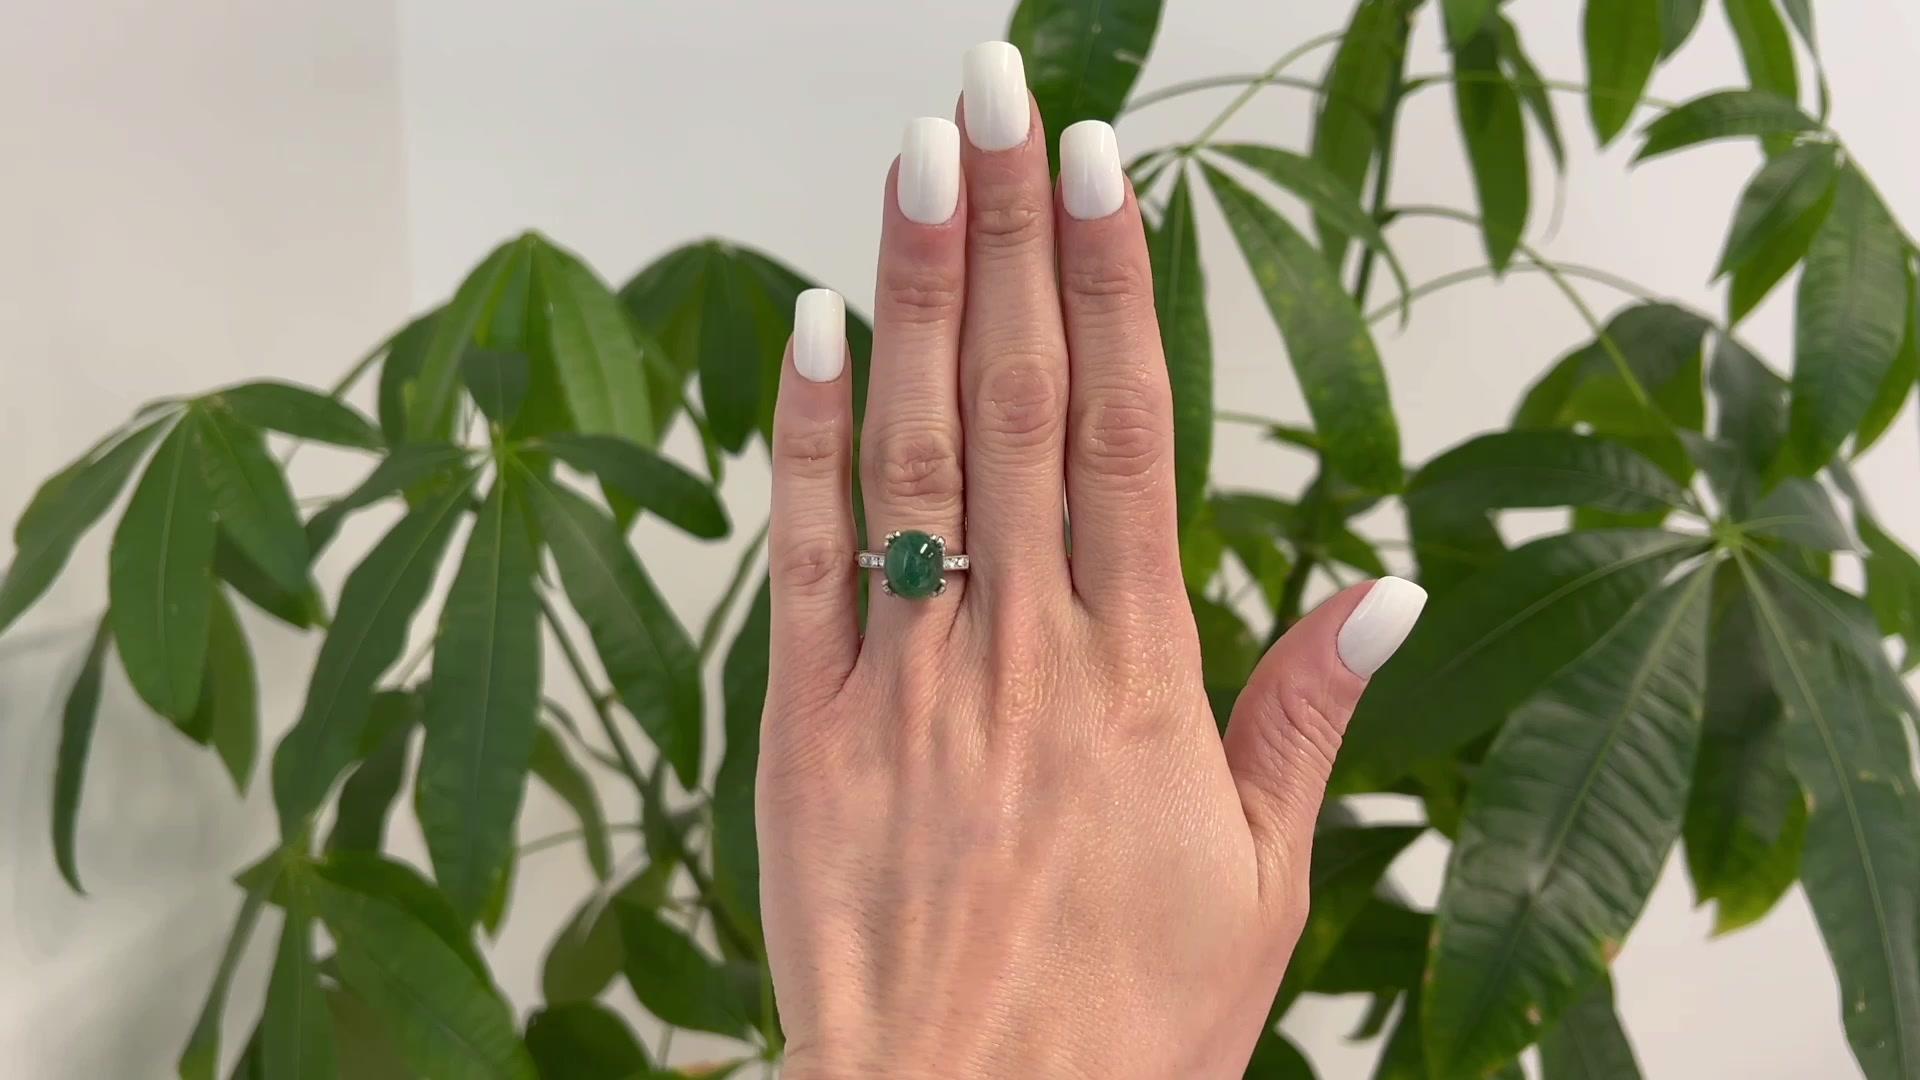 One Mid Century 5.15 Carats Emerald Diamond Platinum Ring. Featuring one cabochon cut emerald of 5.15 carats. Accented by six round brilliant cut diamonds with a total weight of approximately 0.30 carat, graded F color, VS clarity. Crafted in